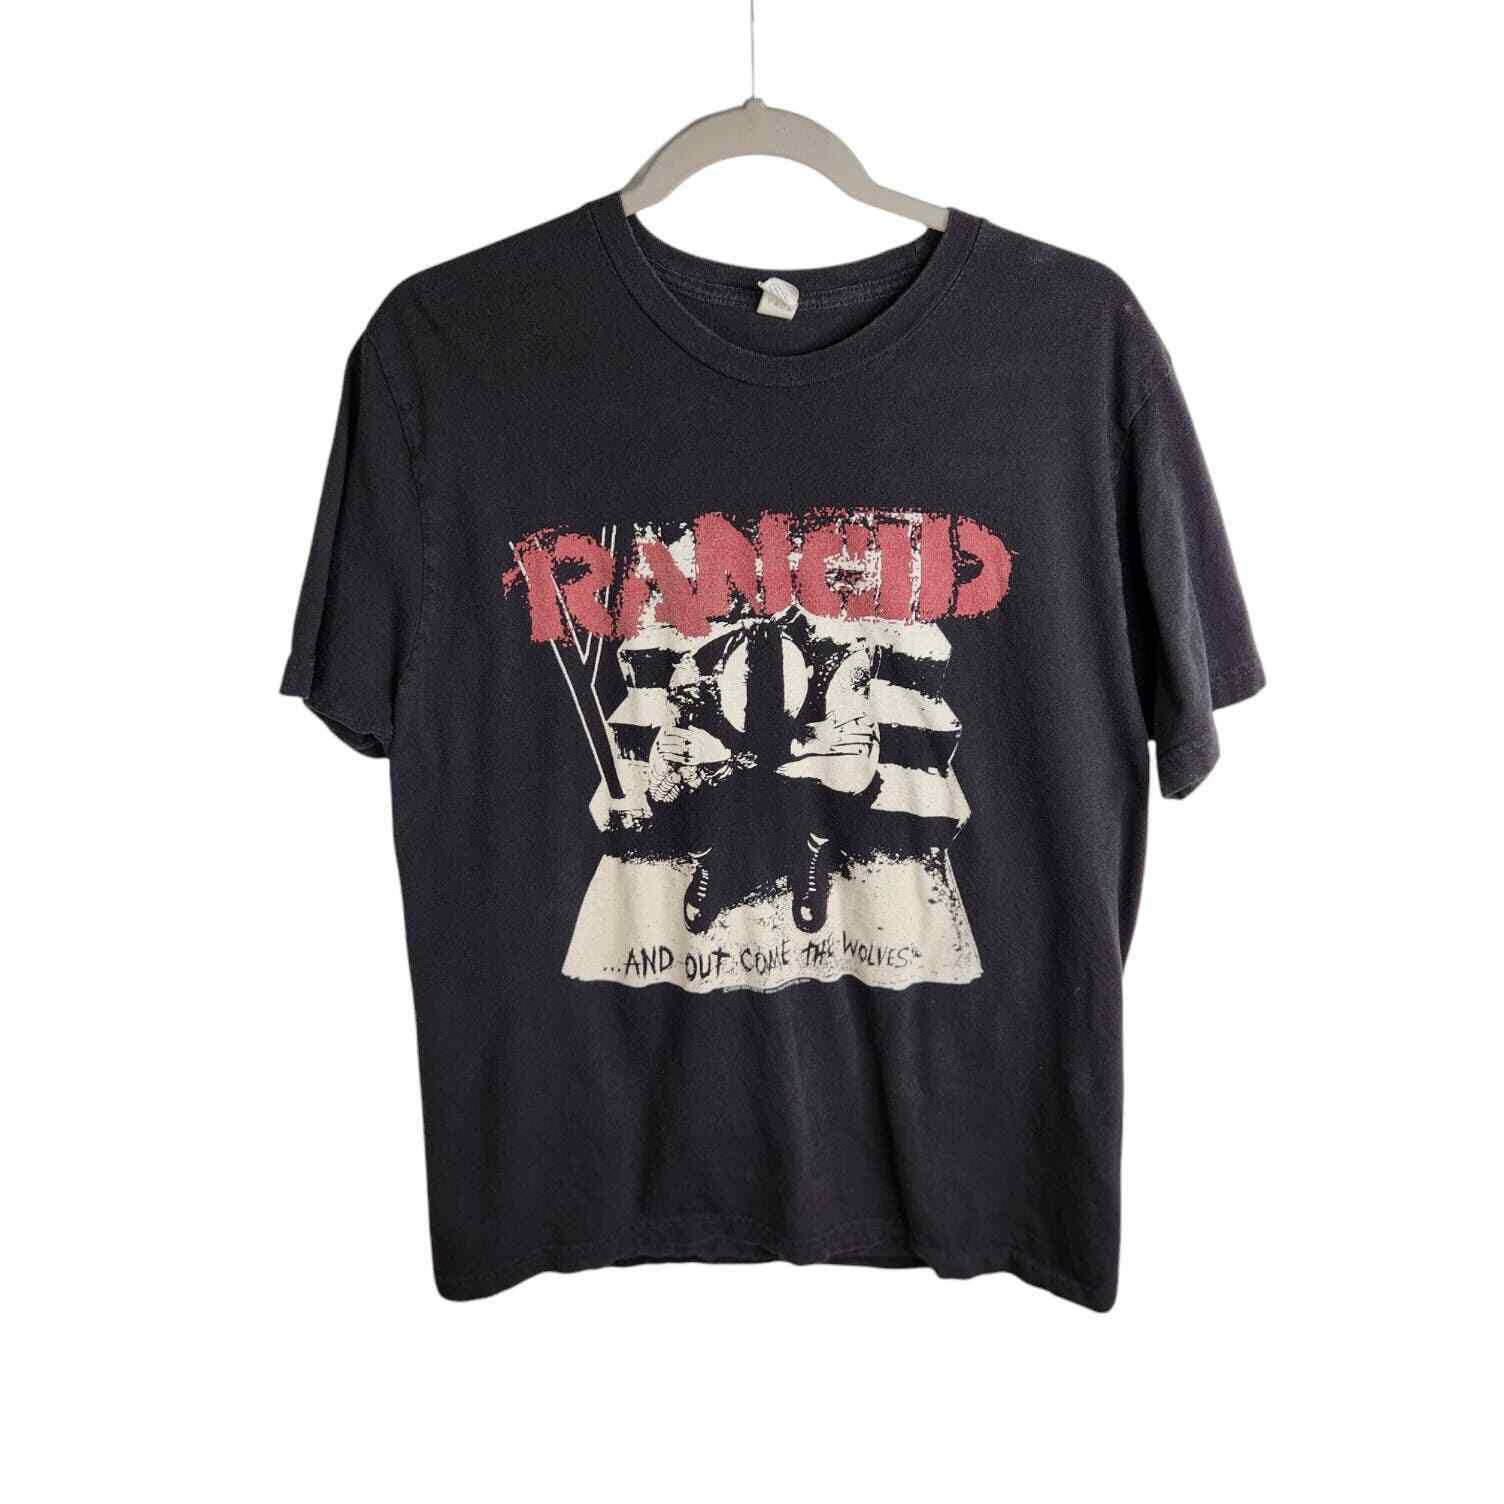 Rancid Vintage Tultex 2005 Machete And Out Come The Wolves Band Tee Large Black